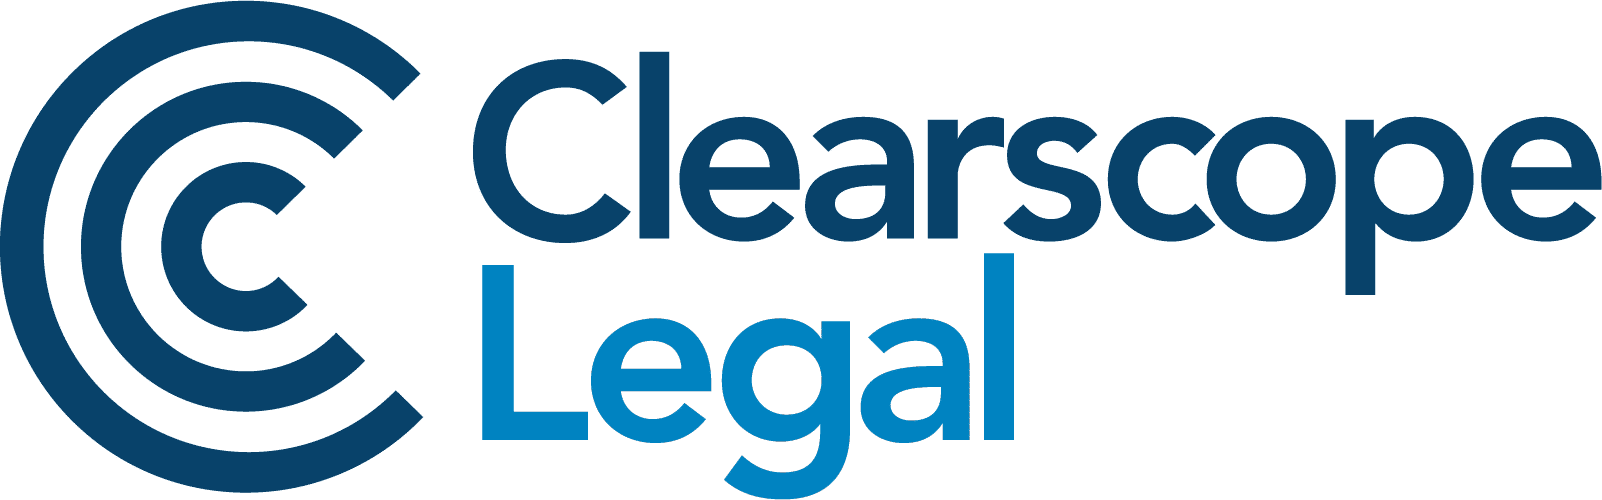 Clearscope Legal